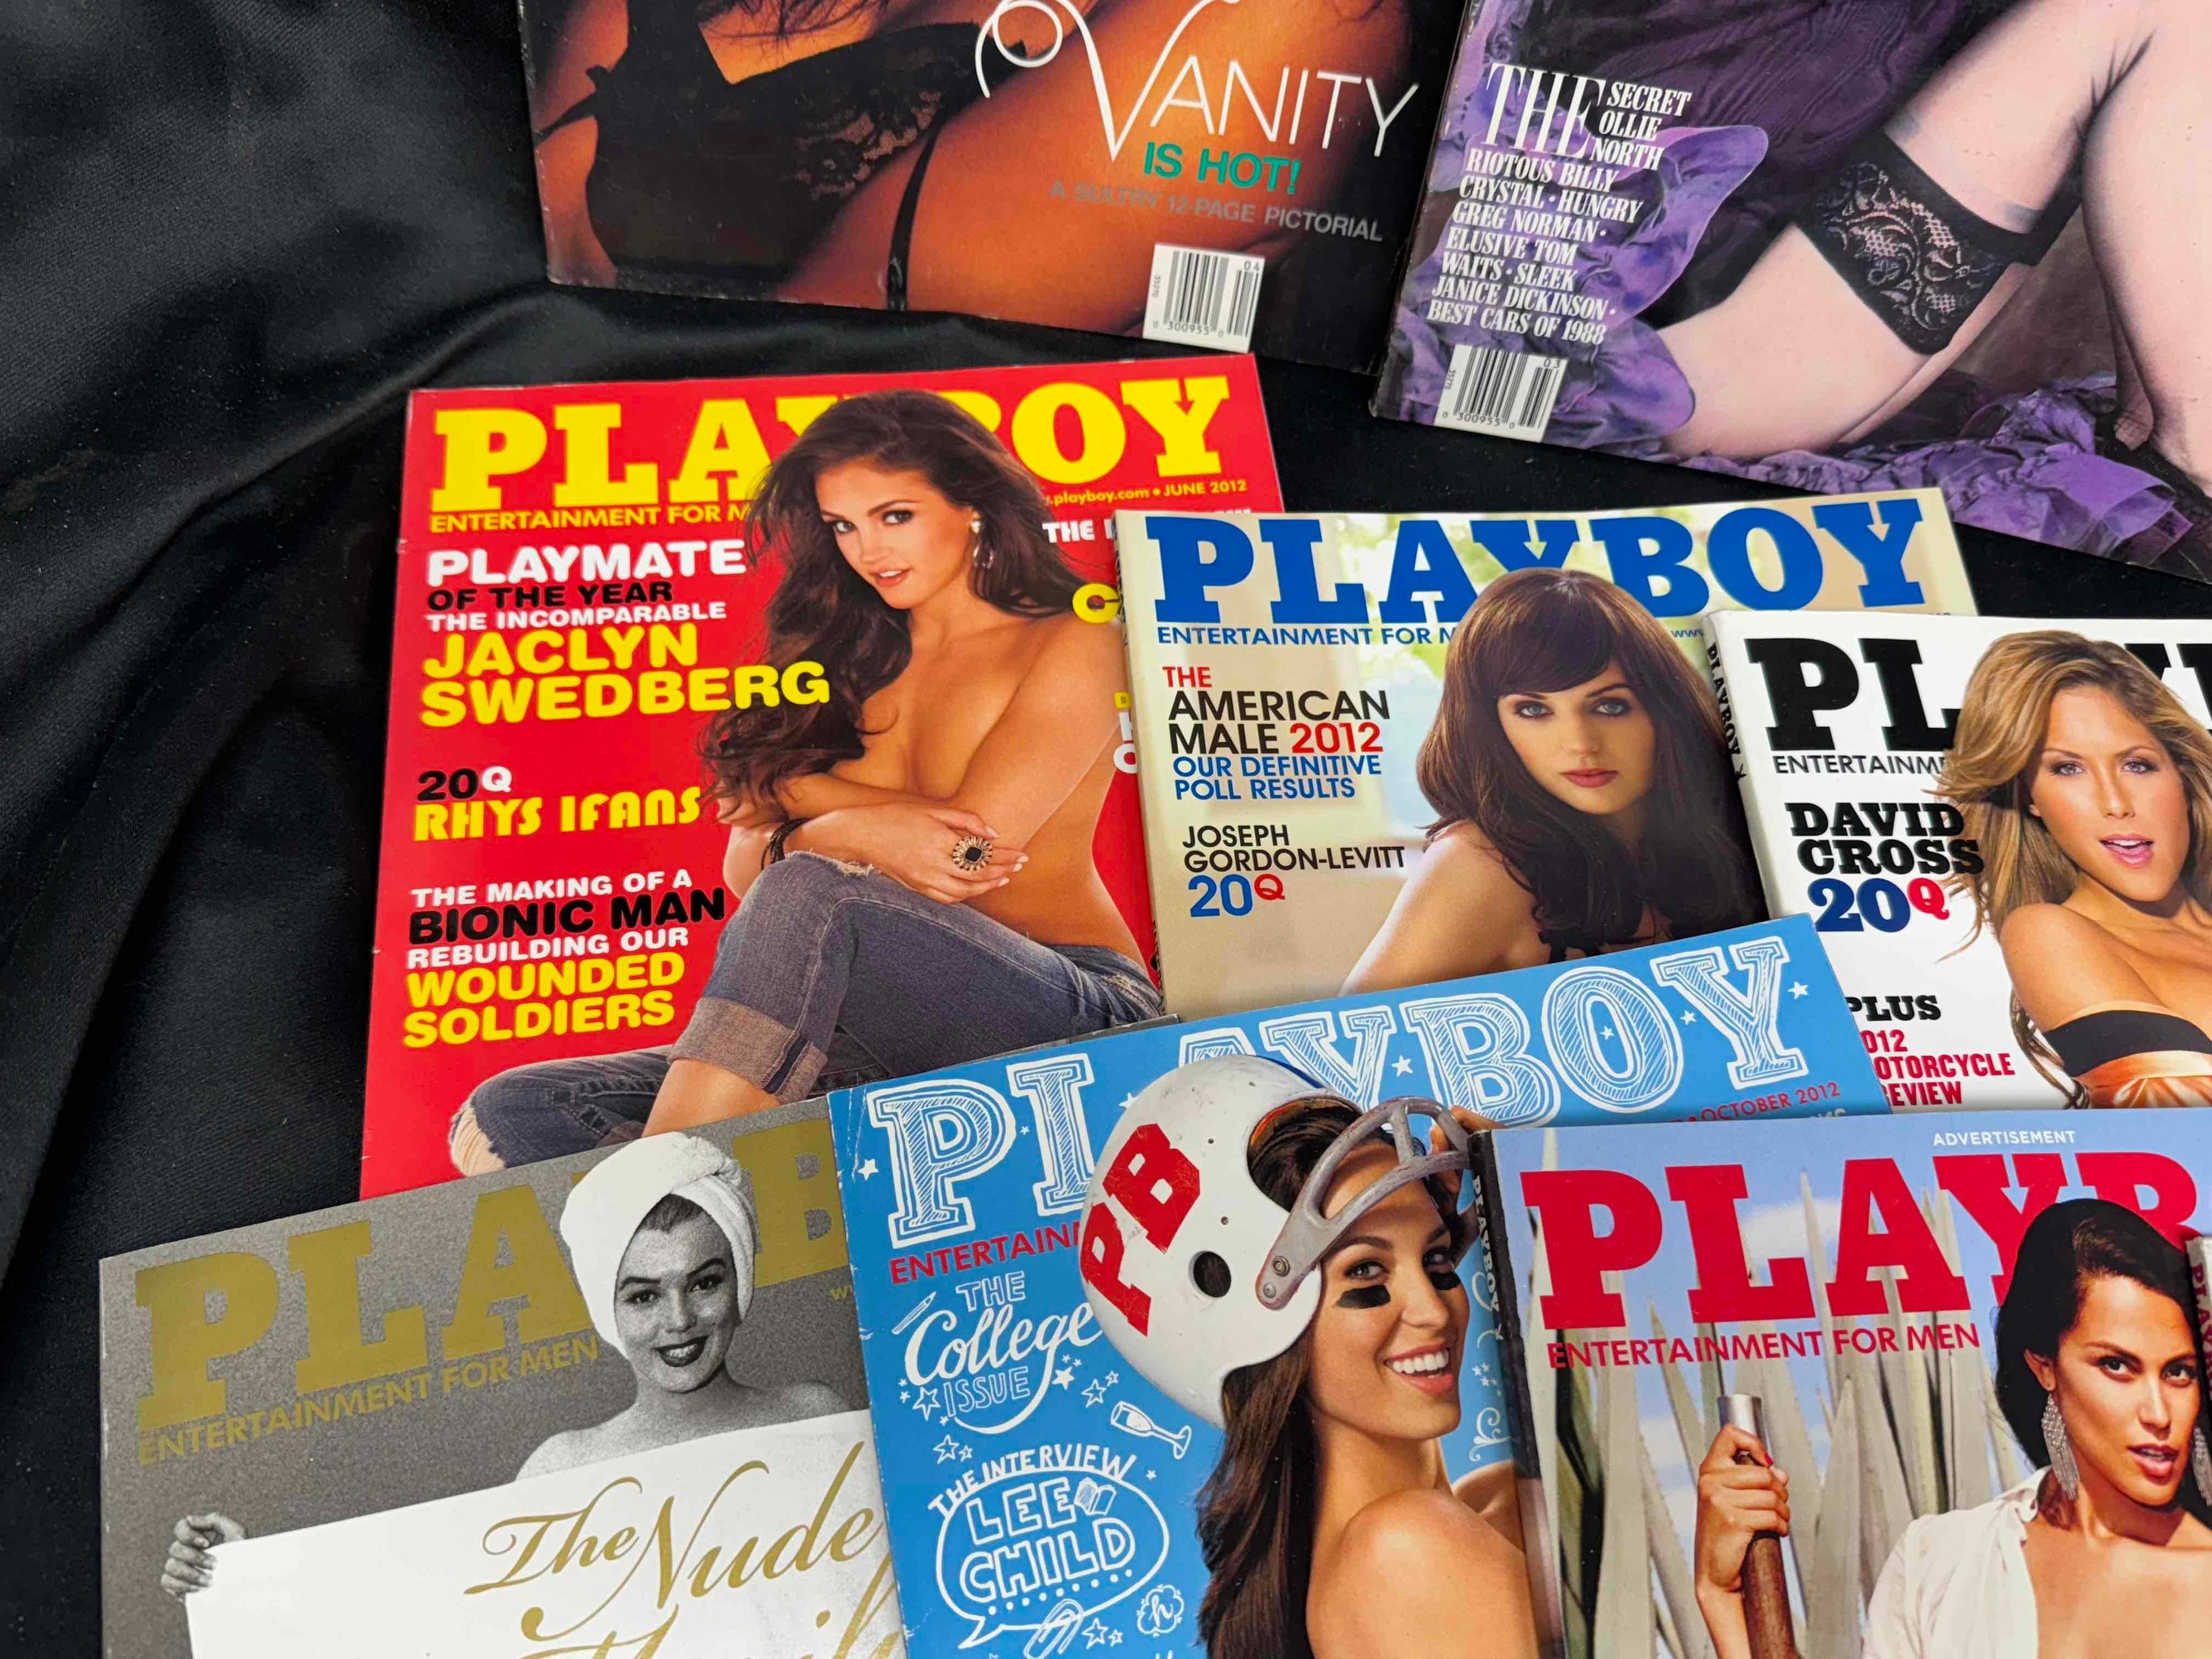 24 Playboy Magazines From Various Years 1980s-2000s